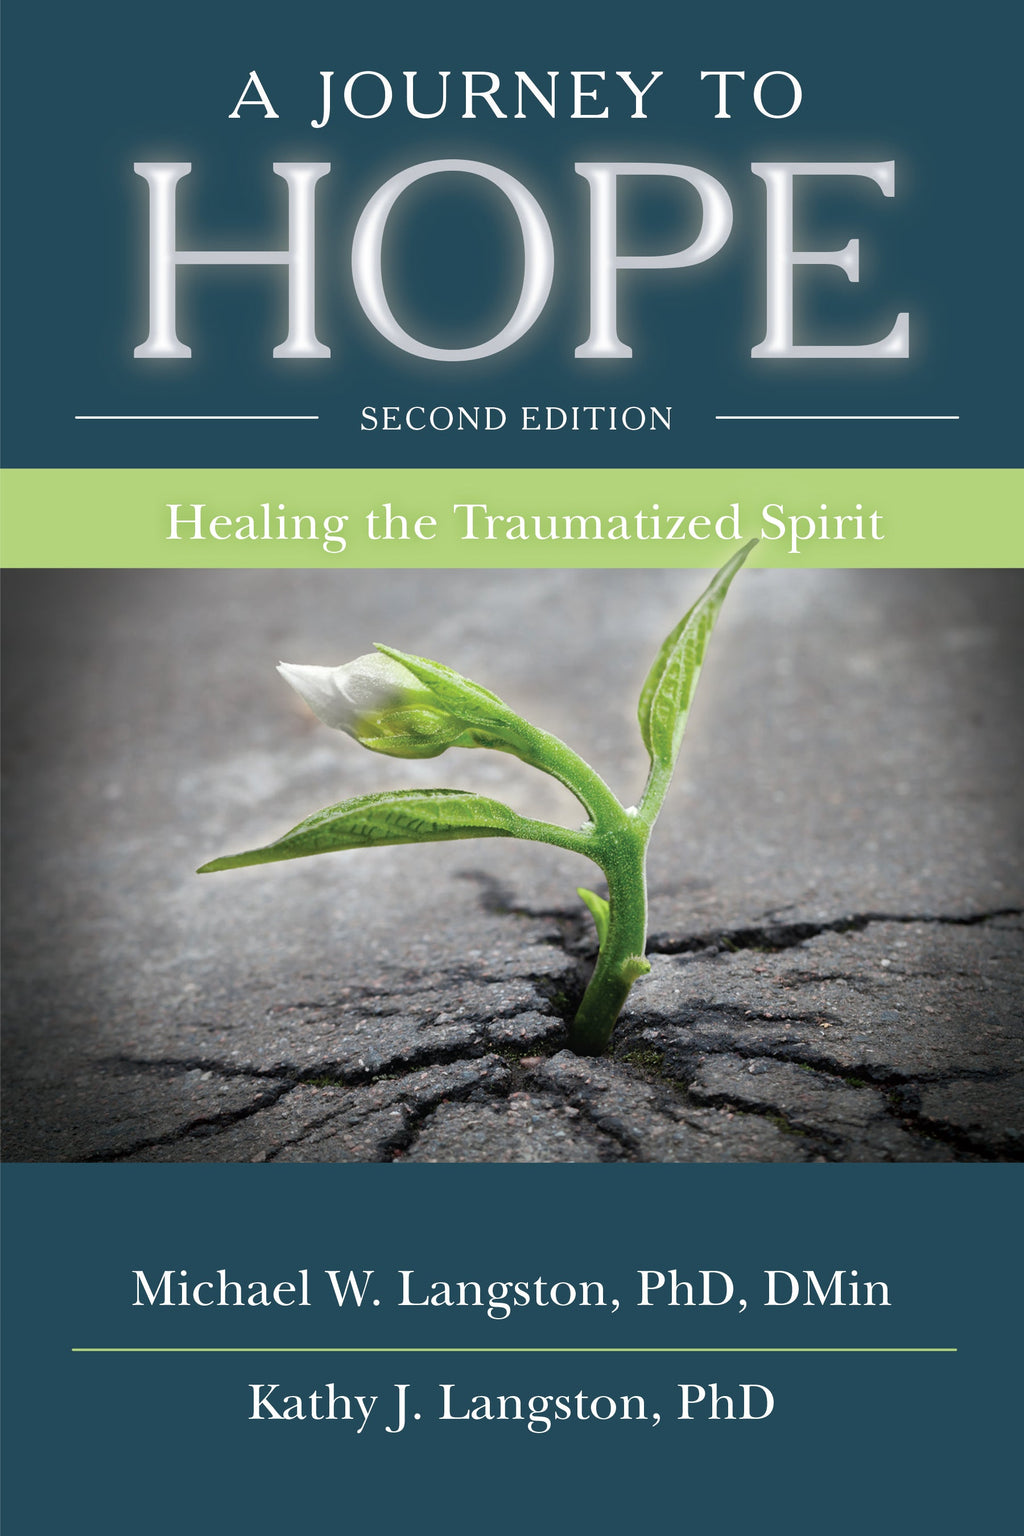 A Journey to Hope (Second Edition)